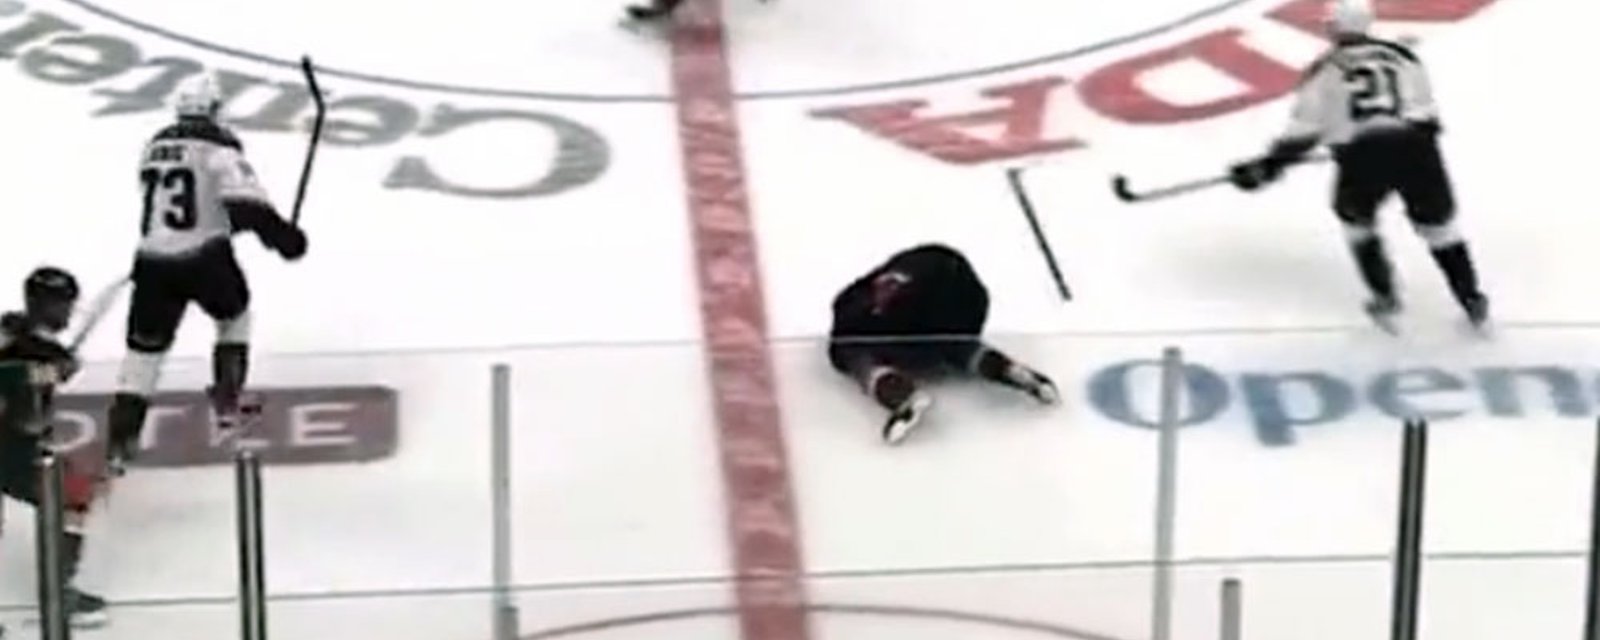 Trevor Zegras gets absolutely obliterated at center ice, fight breaks out